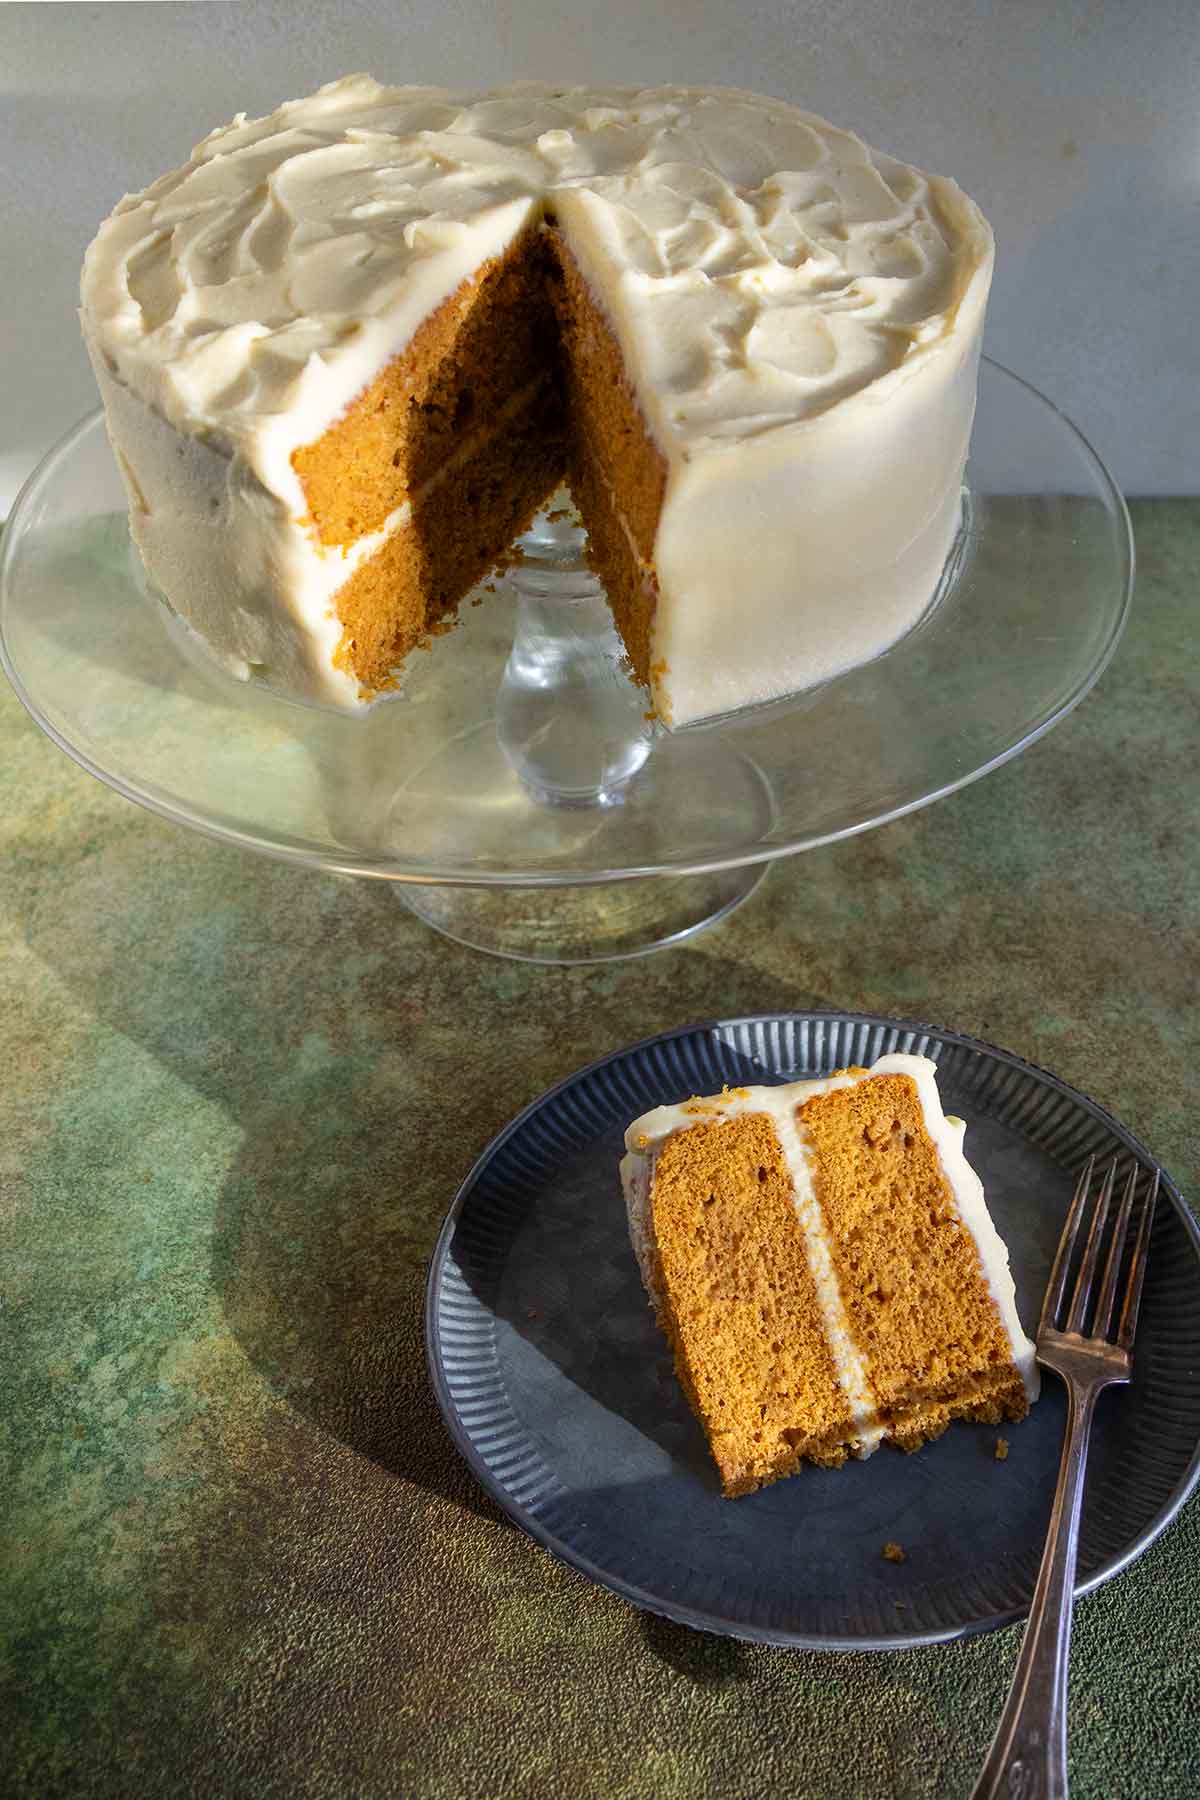 A slice of pumpkin cake with cream cheese frosting cut from a whole cake on a cake stand.